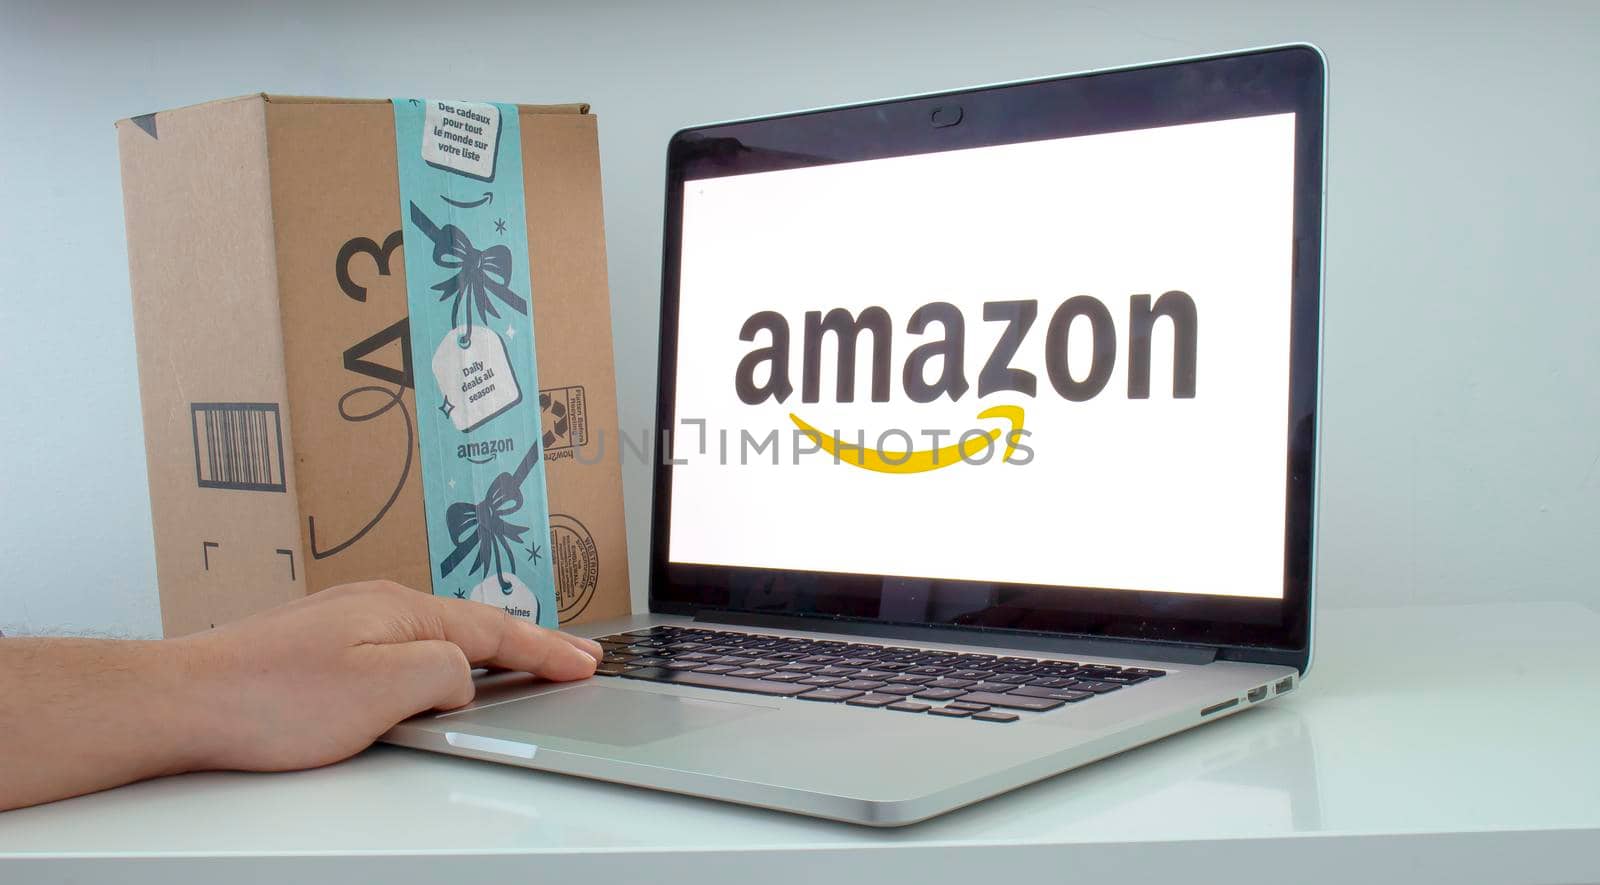 Calgary, Alberta. Canada Dec 11 2019: A Person’s hand is using an apple computer on amazon. Amazon’s fight with US president is about much more than $10bn. Illustrative